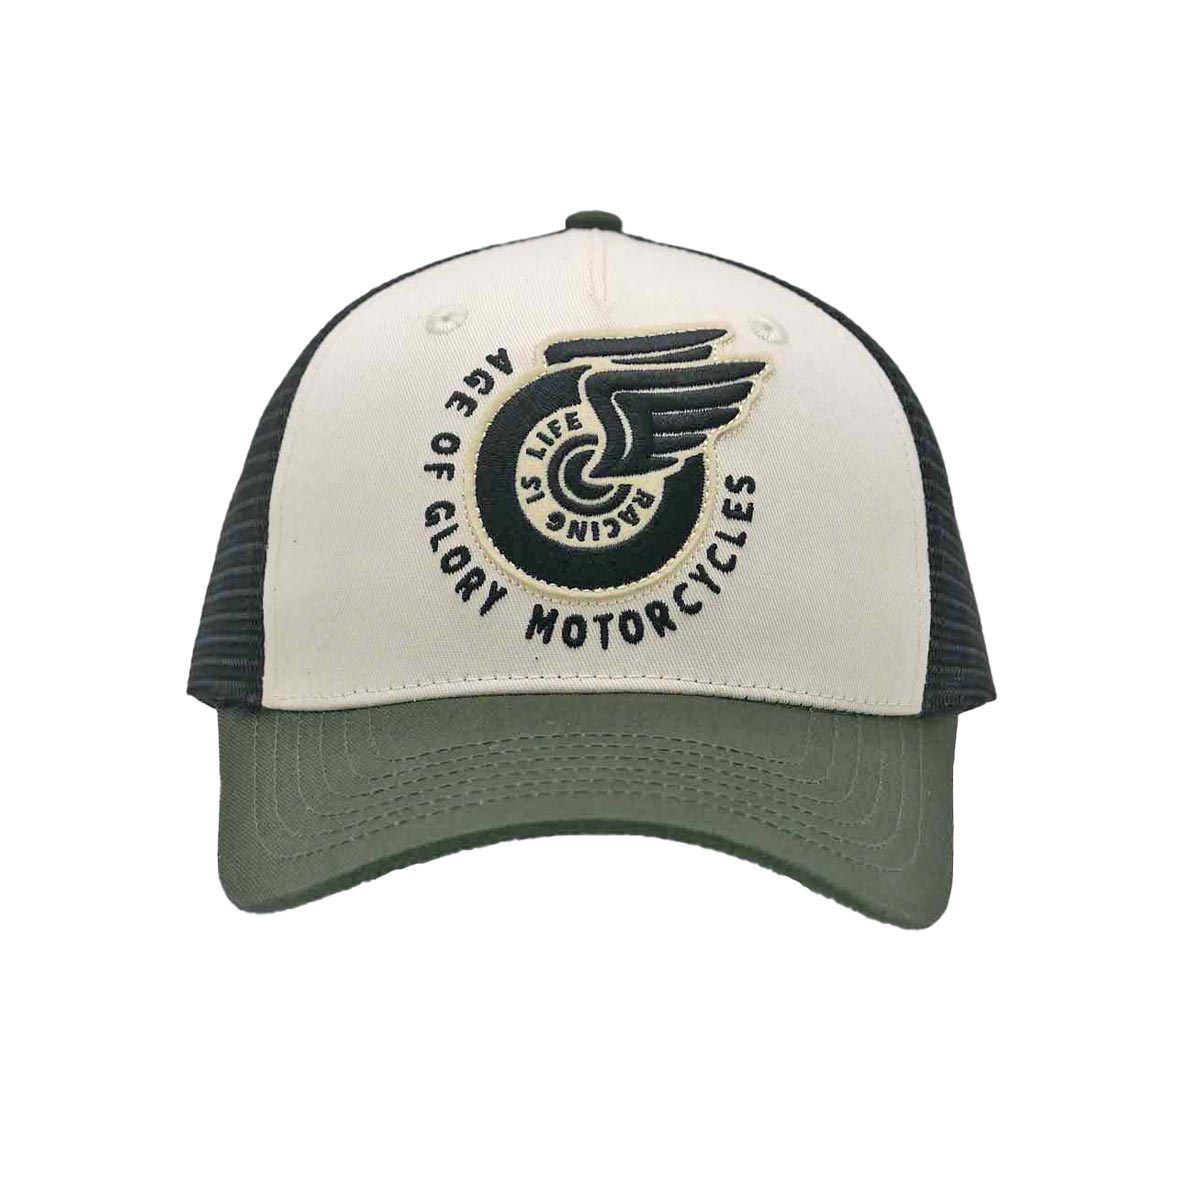 Age of Glory Champ Trucker Cap in White, Green and Black - available at Veloce Club